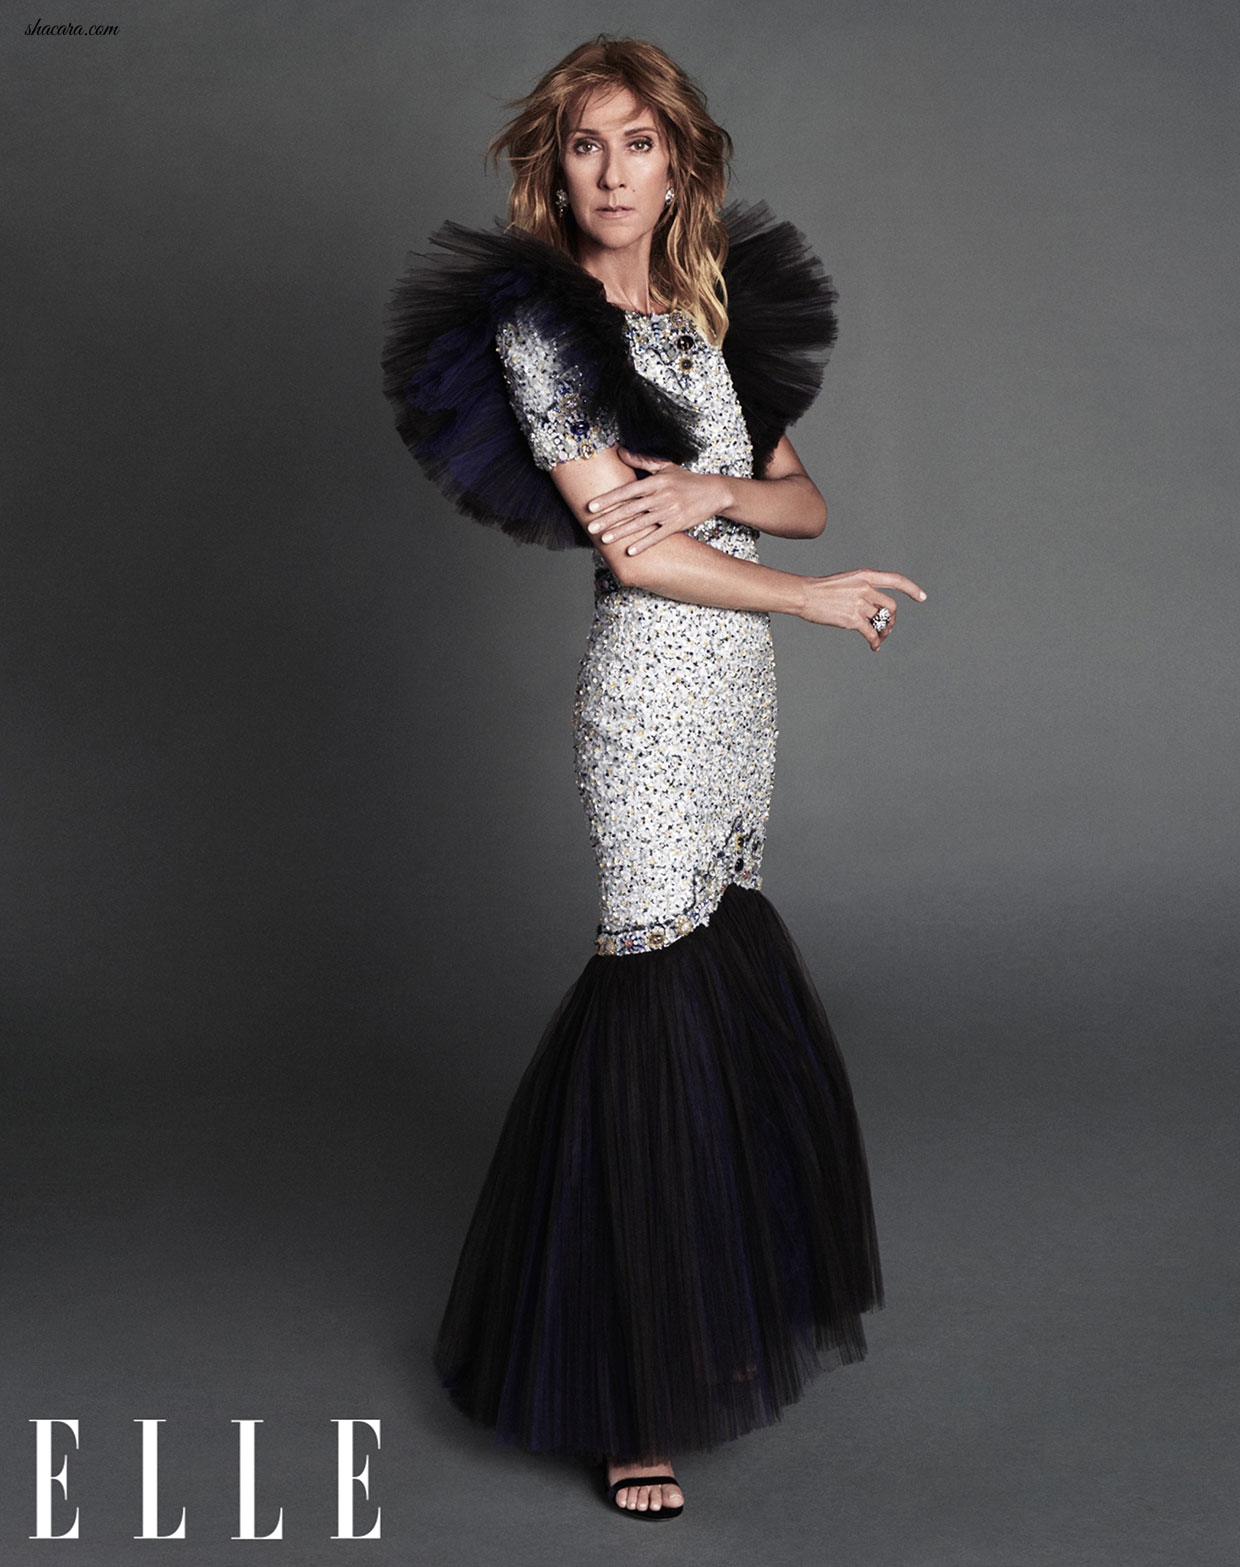 Celine Dion Covers ELLE Magazine’s Latest Issue, Says Her Life ‘Started Over At 50’